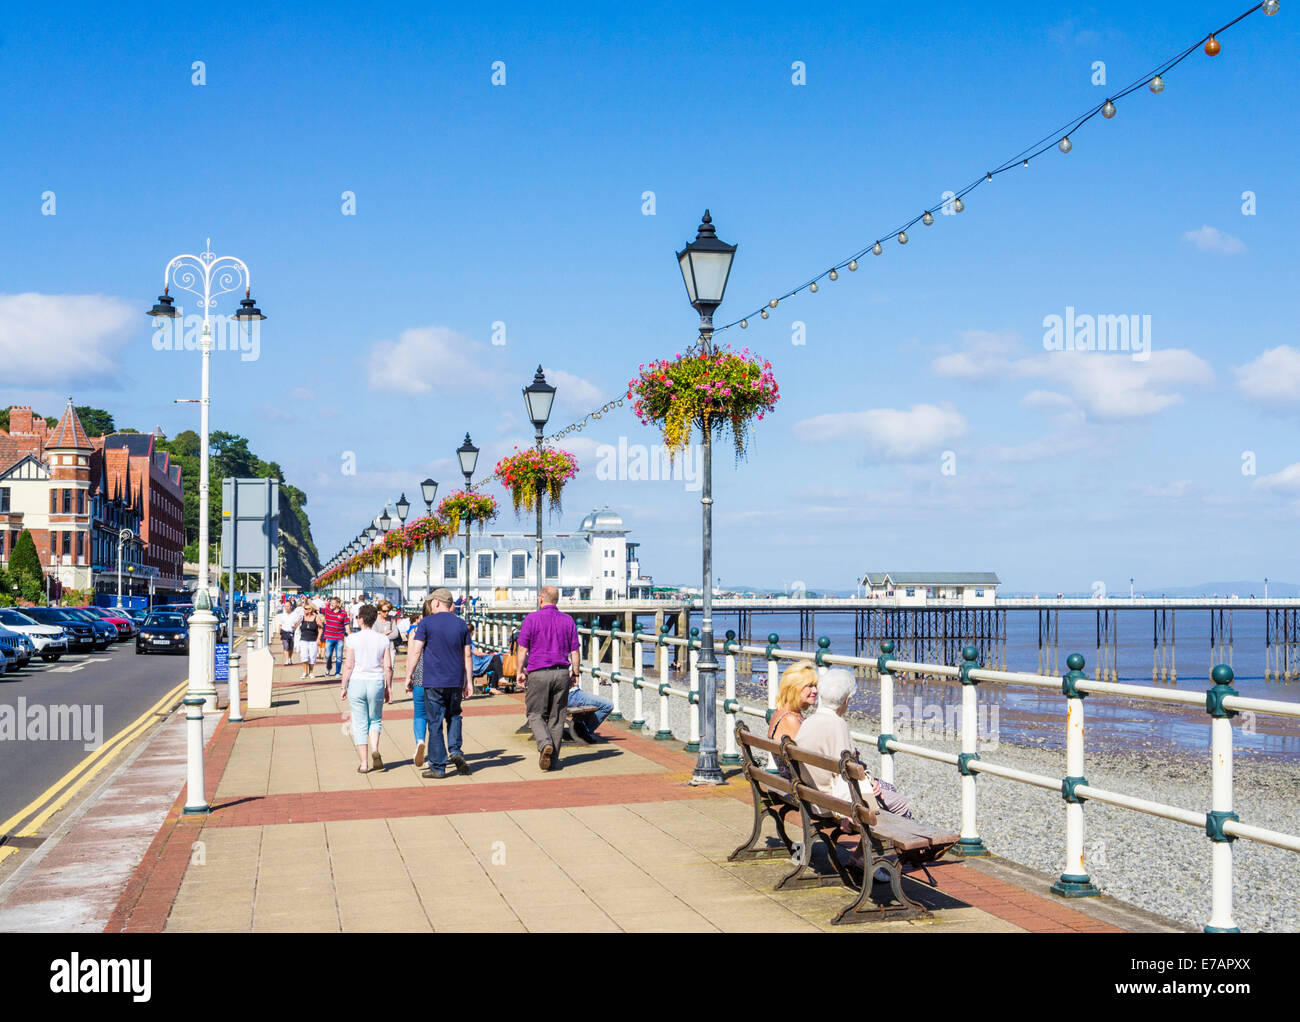 Seafront, Beach and Pier Penarth Vale of Glamorgan South Wales GB UK EU Europe Stock Photo